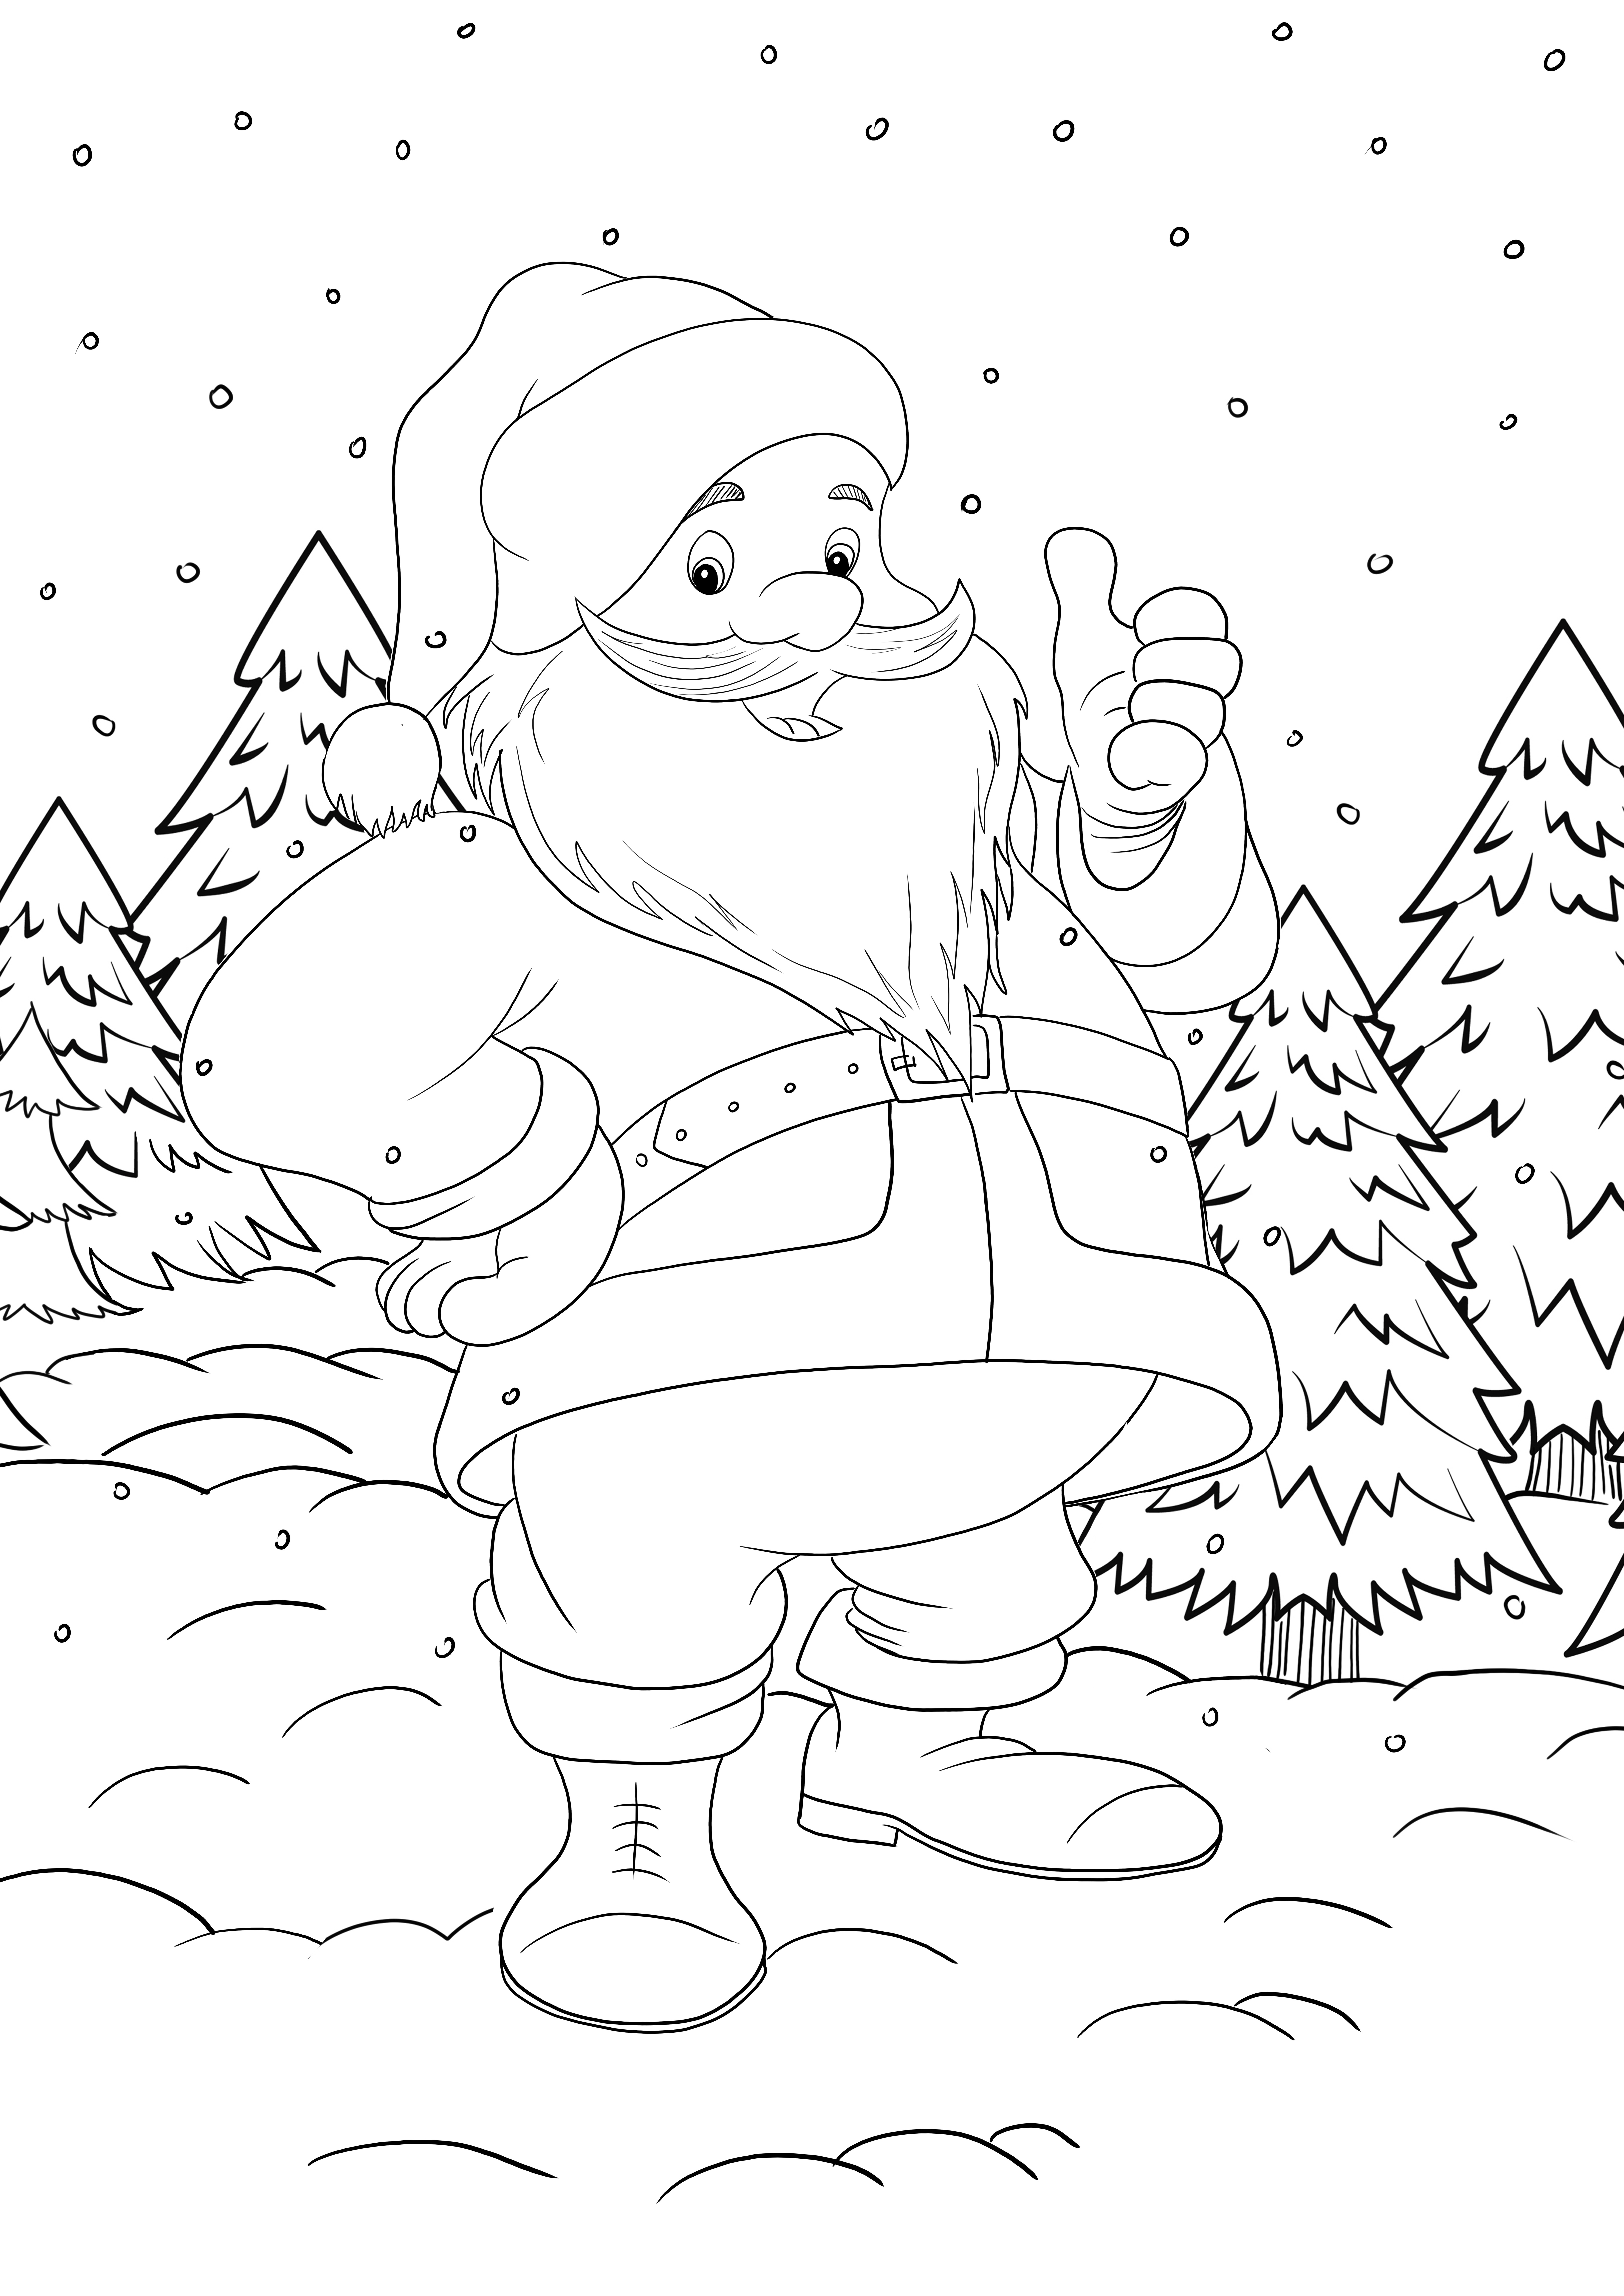 Funny Santa Claus thumbs up and waits to be colored for free by kids